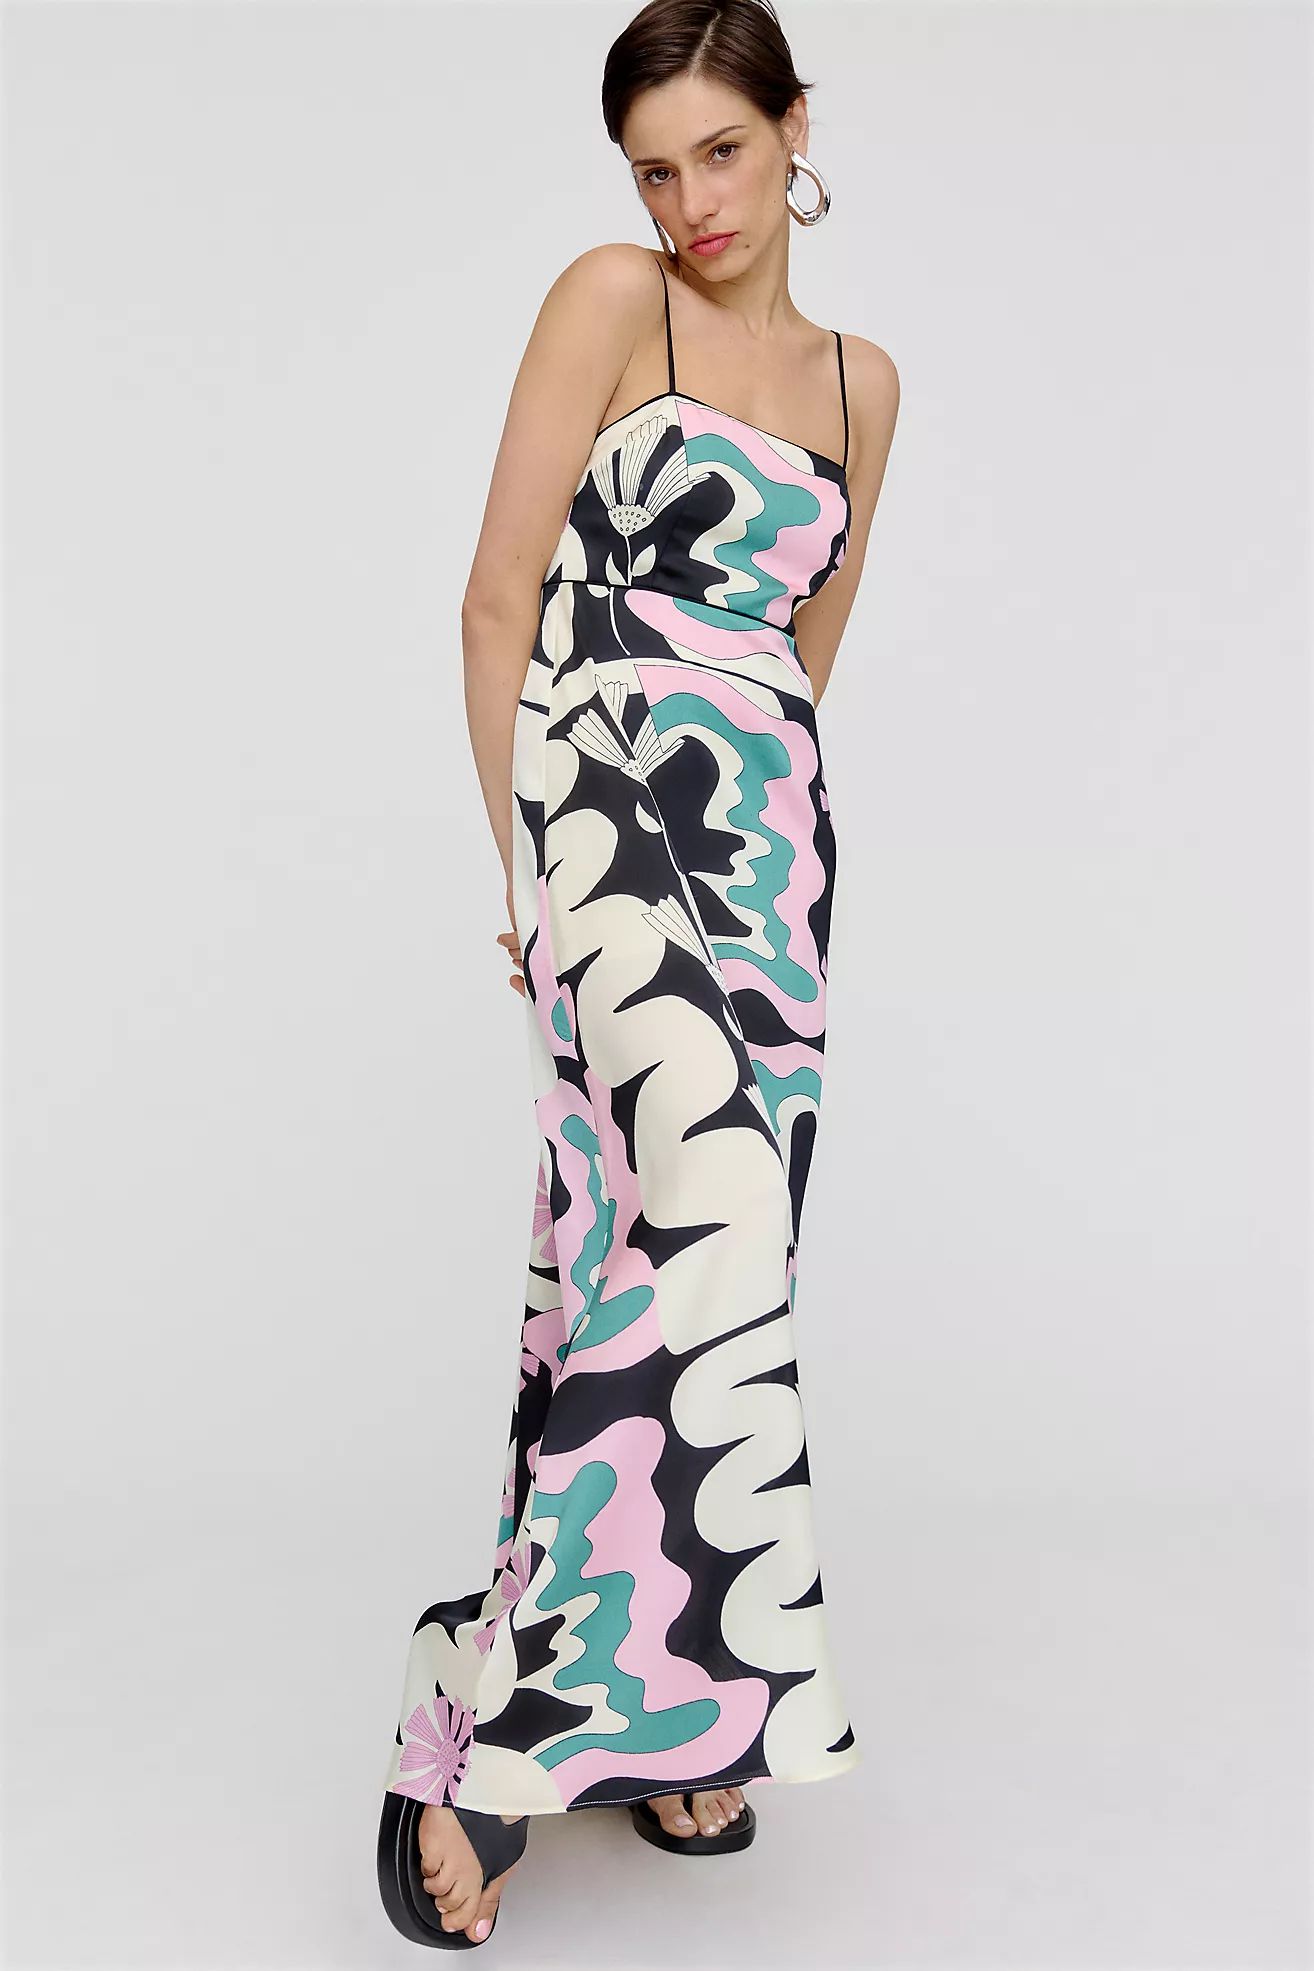 Oopscool Graphic Print Dress | Anthropologie (US)